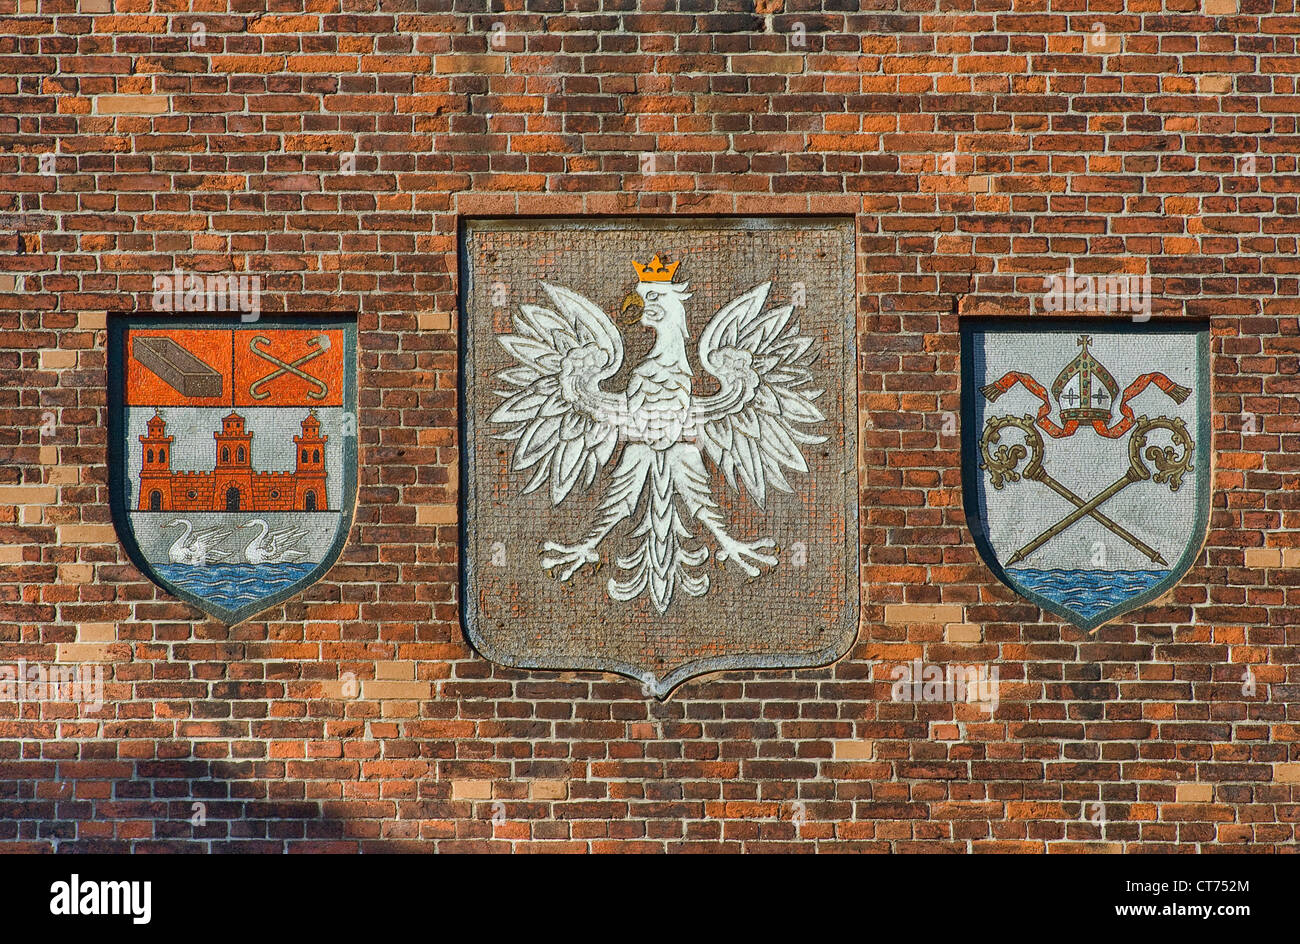 Coats of arms of Poland and city at town hall in Kołobrzeg in Pomerania, West Pomeranian Voivodeship, Poland Stock Photo